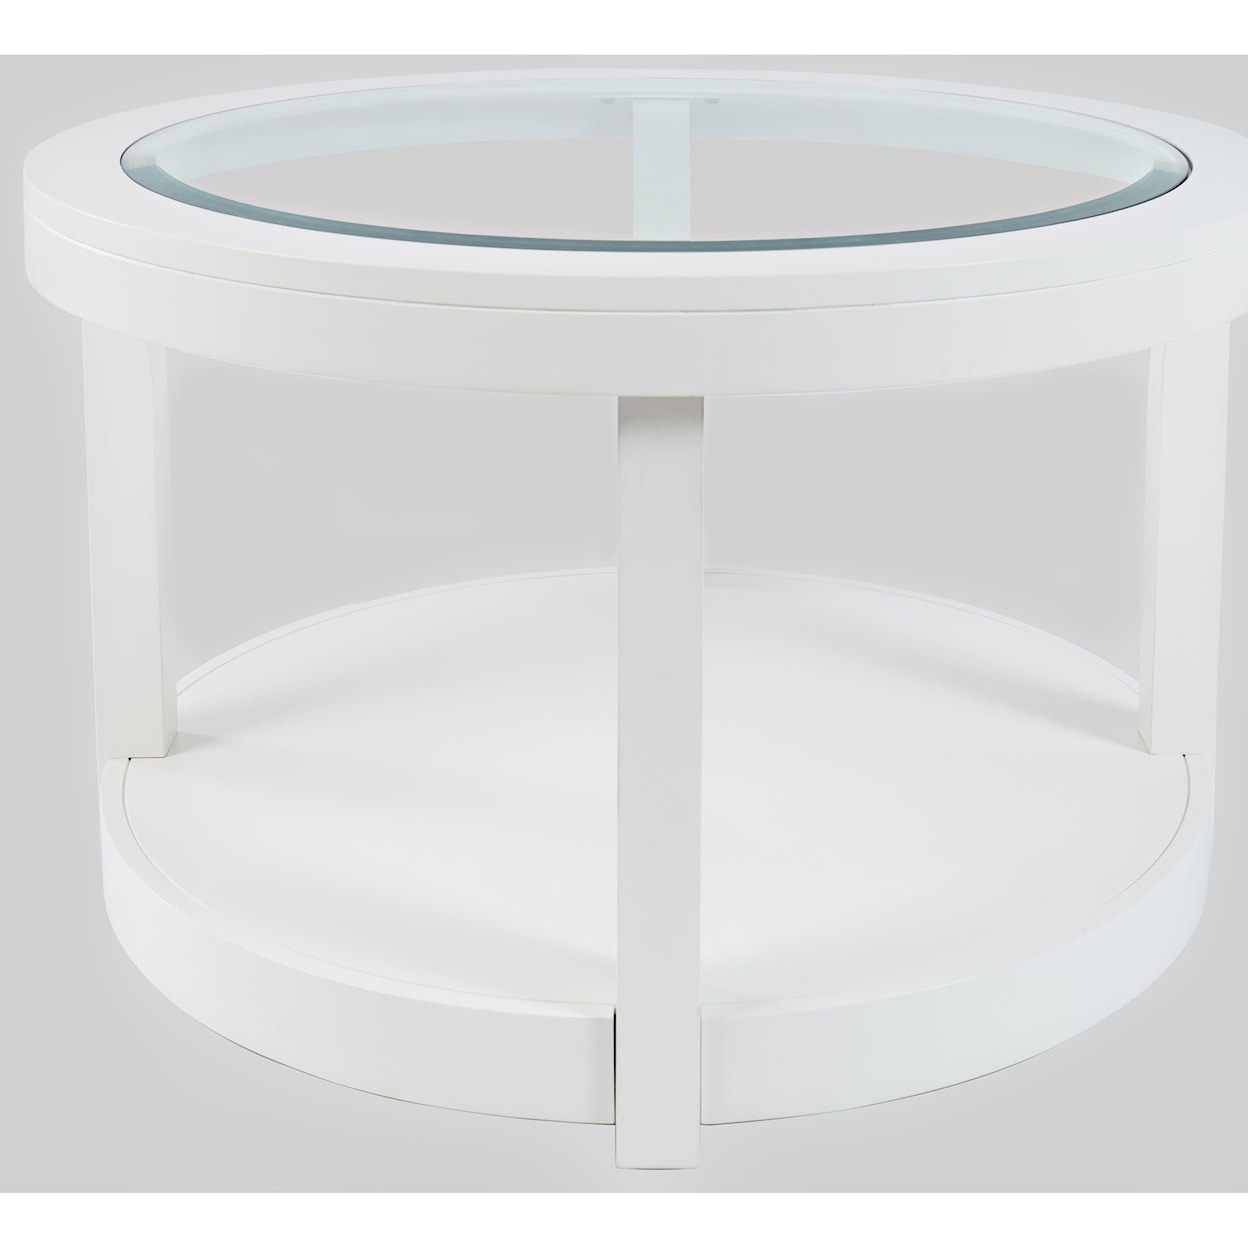 VFM Signature Urban Icon Round Castered Cocktail Table